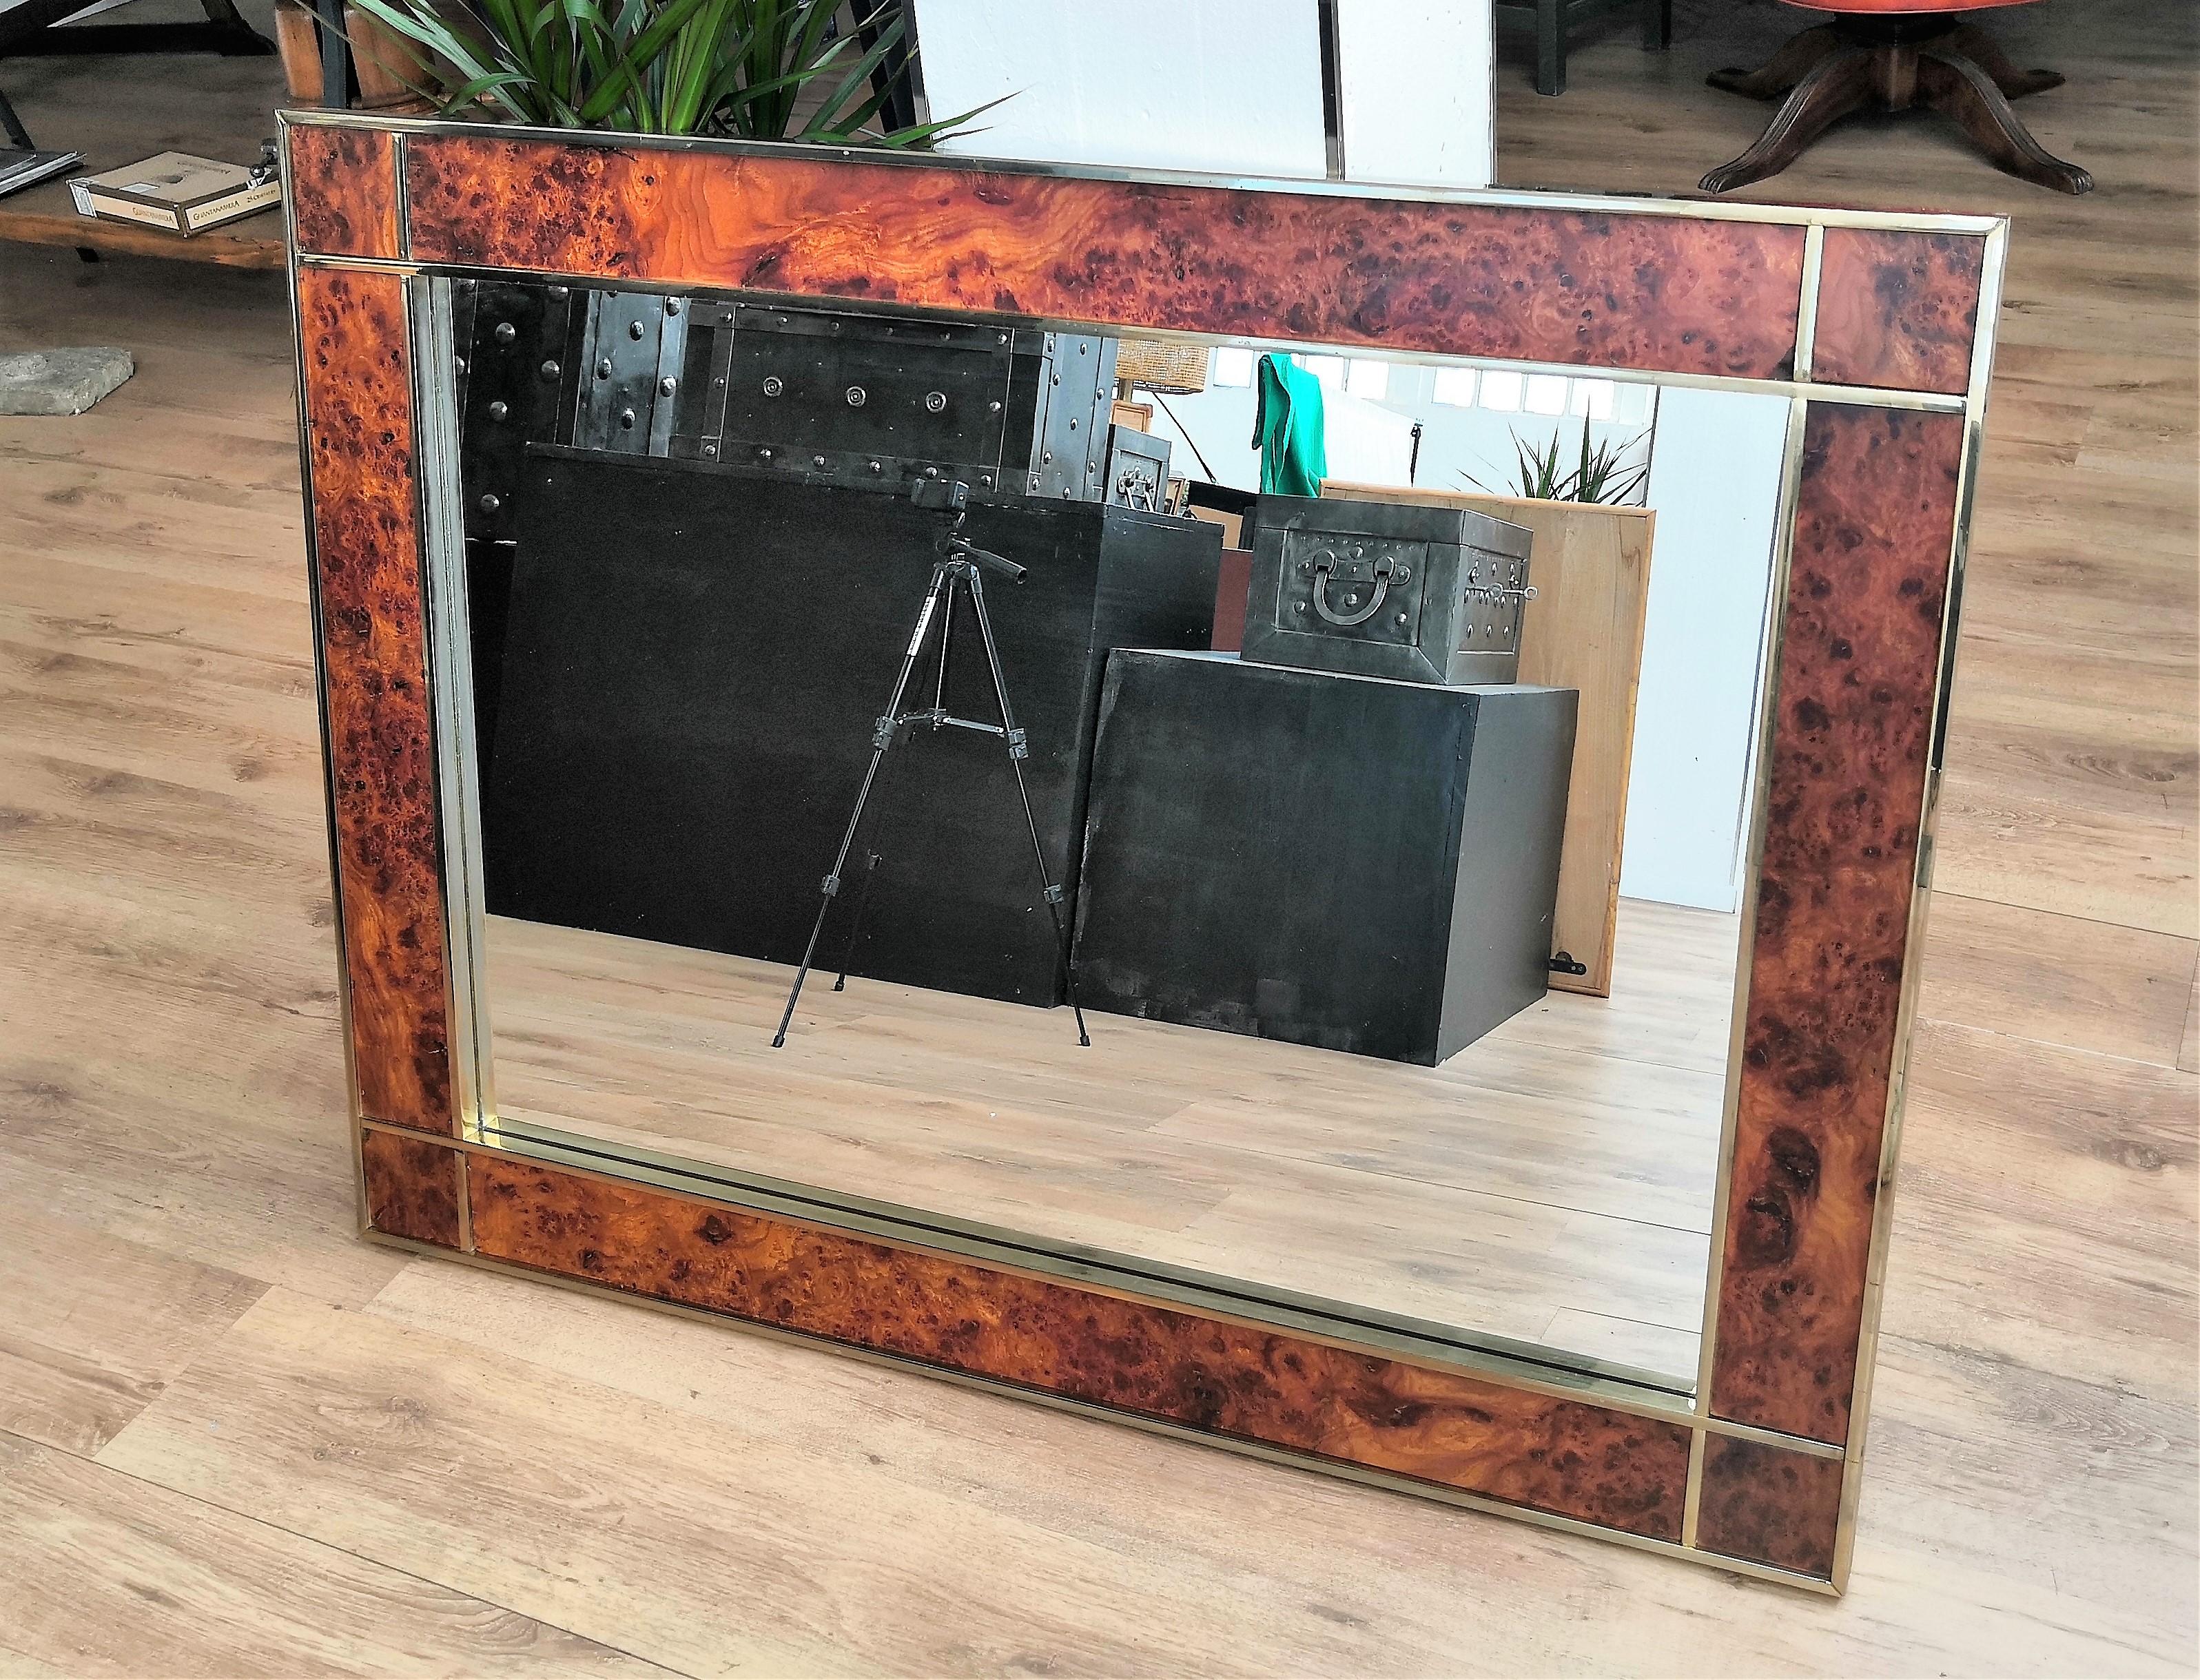 Very elegant Italian Art Deco Regency mirror with beautiful and iconic frame in walnut burl elm and brass. The mirror measures cm 120 x 90, inches 47.24 x 35.43, shows minor fading scratches and slight oxidation on the sides, while the front and